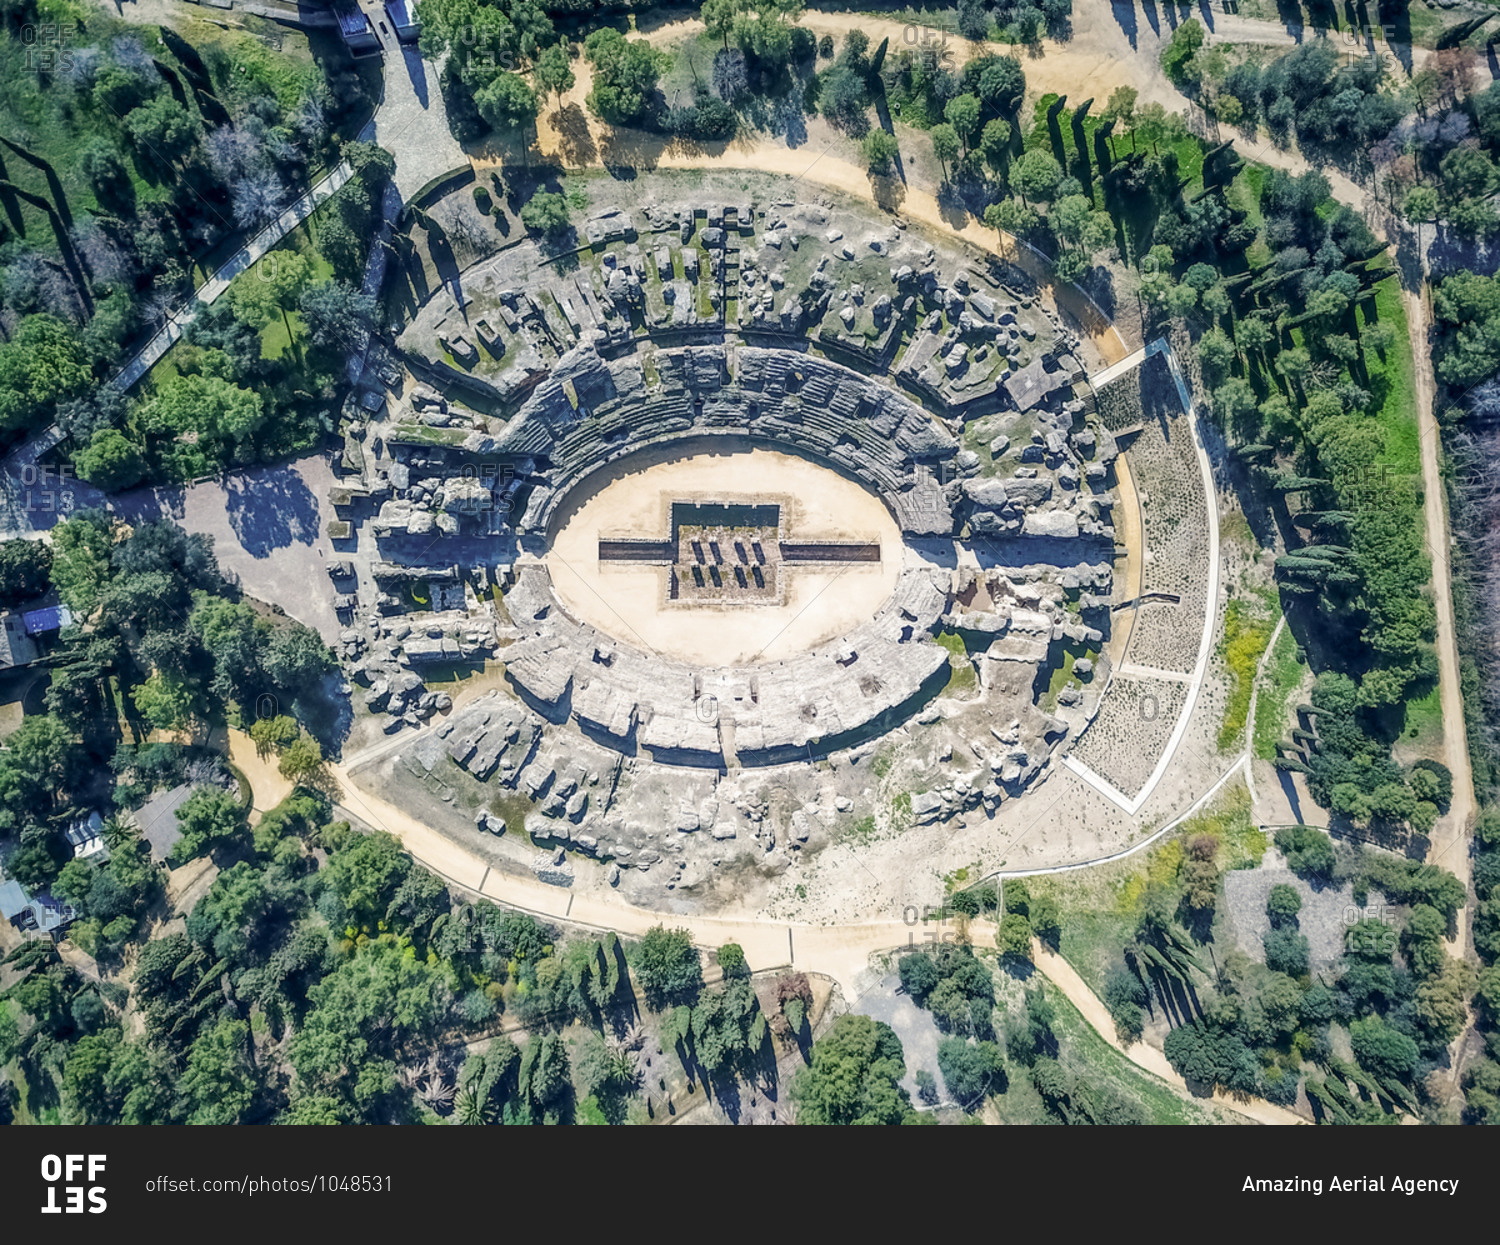 Aerial view of an archaeological site called Conjunto Arqueologico de Italica, an old Roman city in Santiponce, Sevilla, Andalusia, Spain.